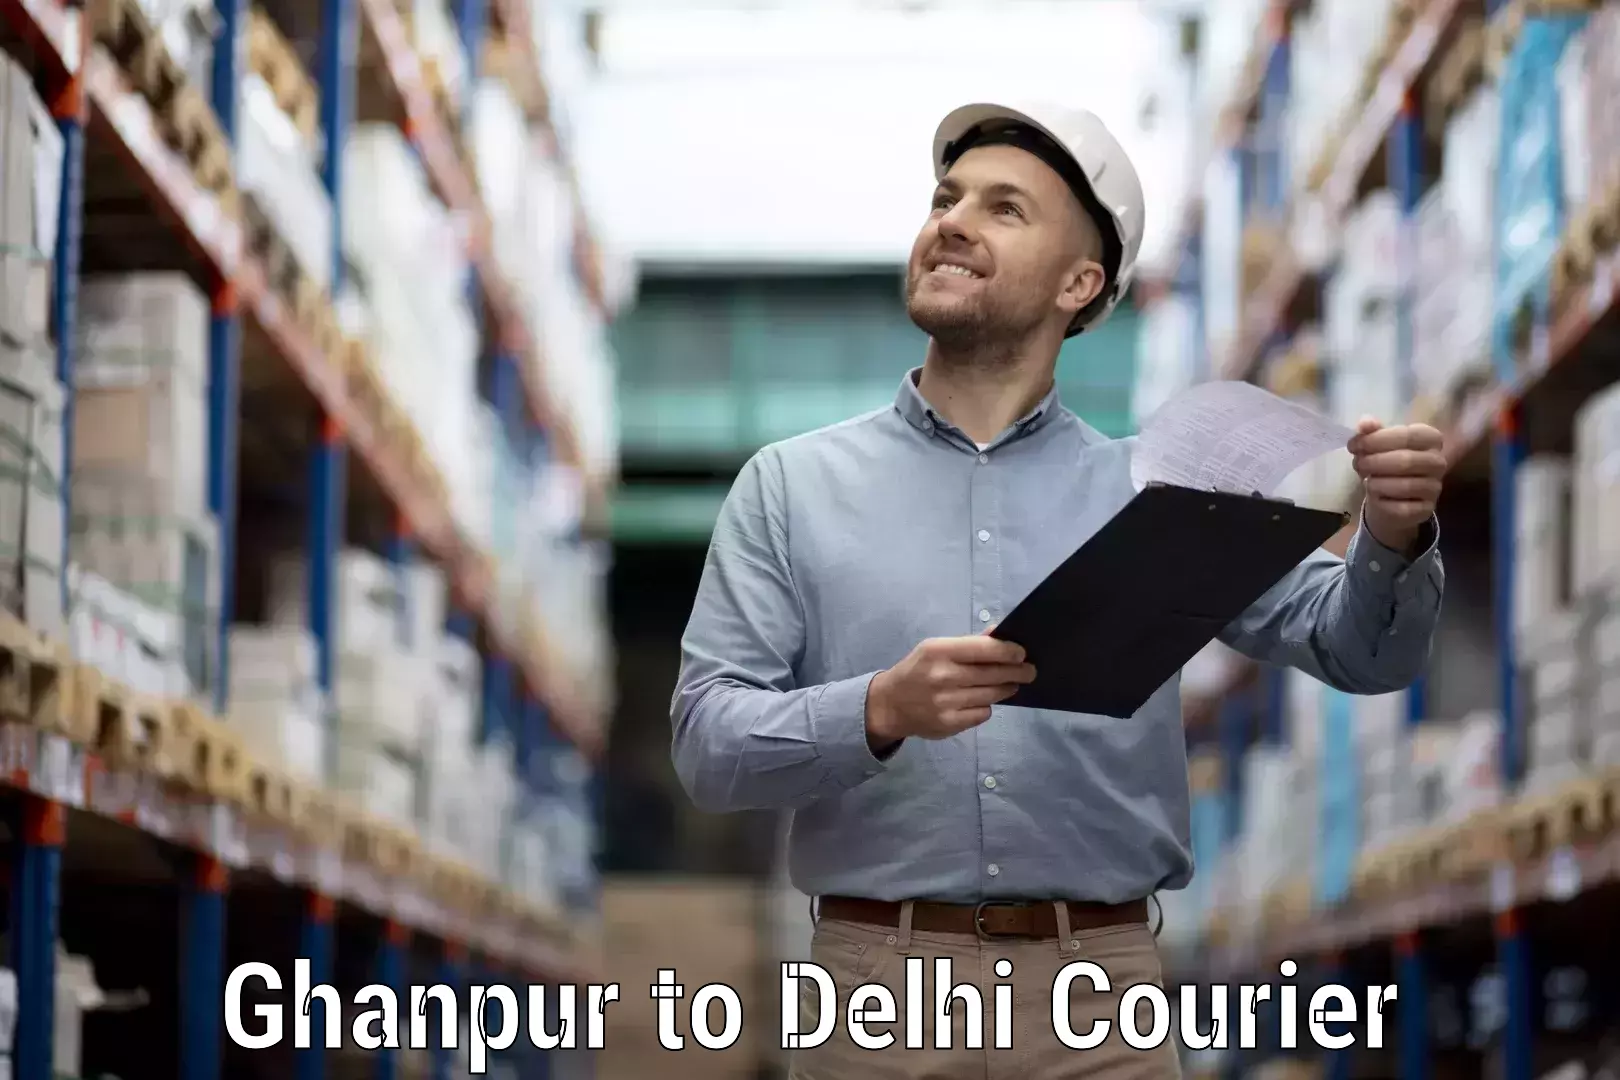 Courier app Ghanpur to Lodhi Road